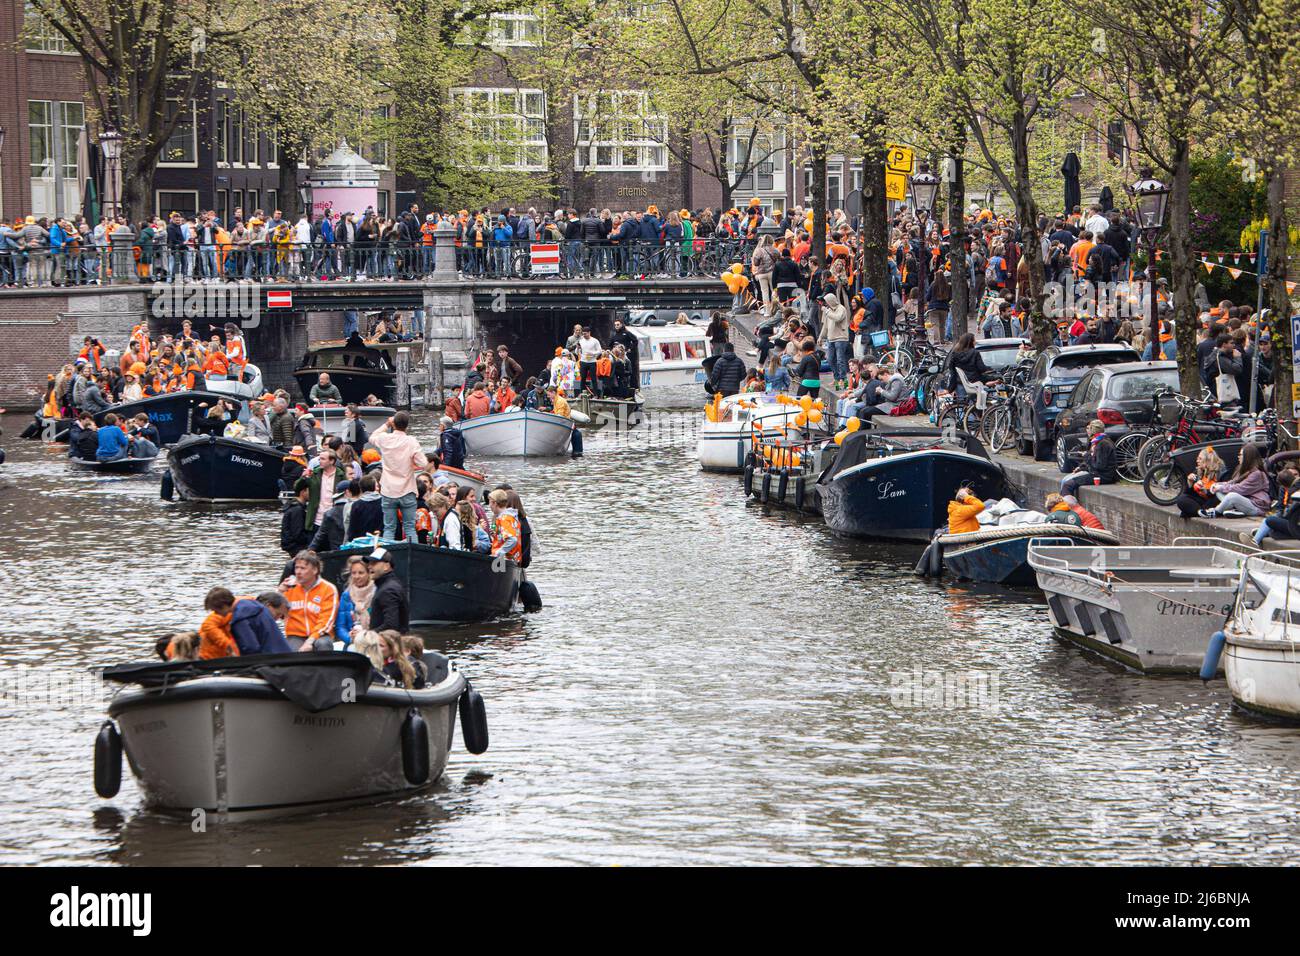 People seen on the boats in the canals of Amsterdam during the King's Day celebration. King's Day known as Koningsdag is an orange filled celebration for the king's birthday, a national holiday full of events across the country. Thousands of local revellers and tourists visited Amsterdam to celebrate and party around the canals while wearing orange clothes and the boats doing a parade in the water canals. Stock Photo